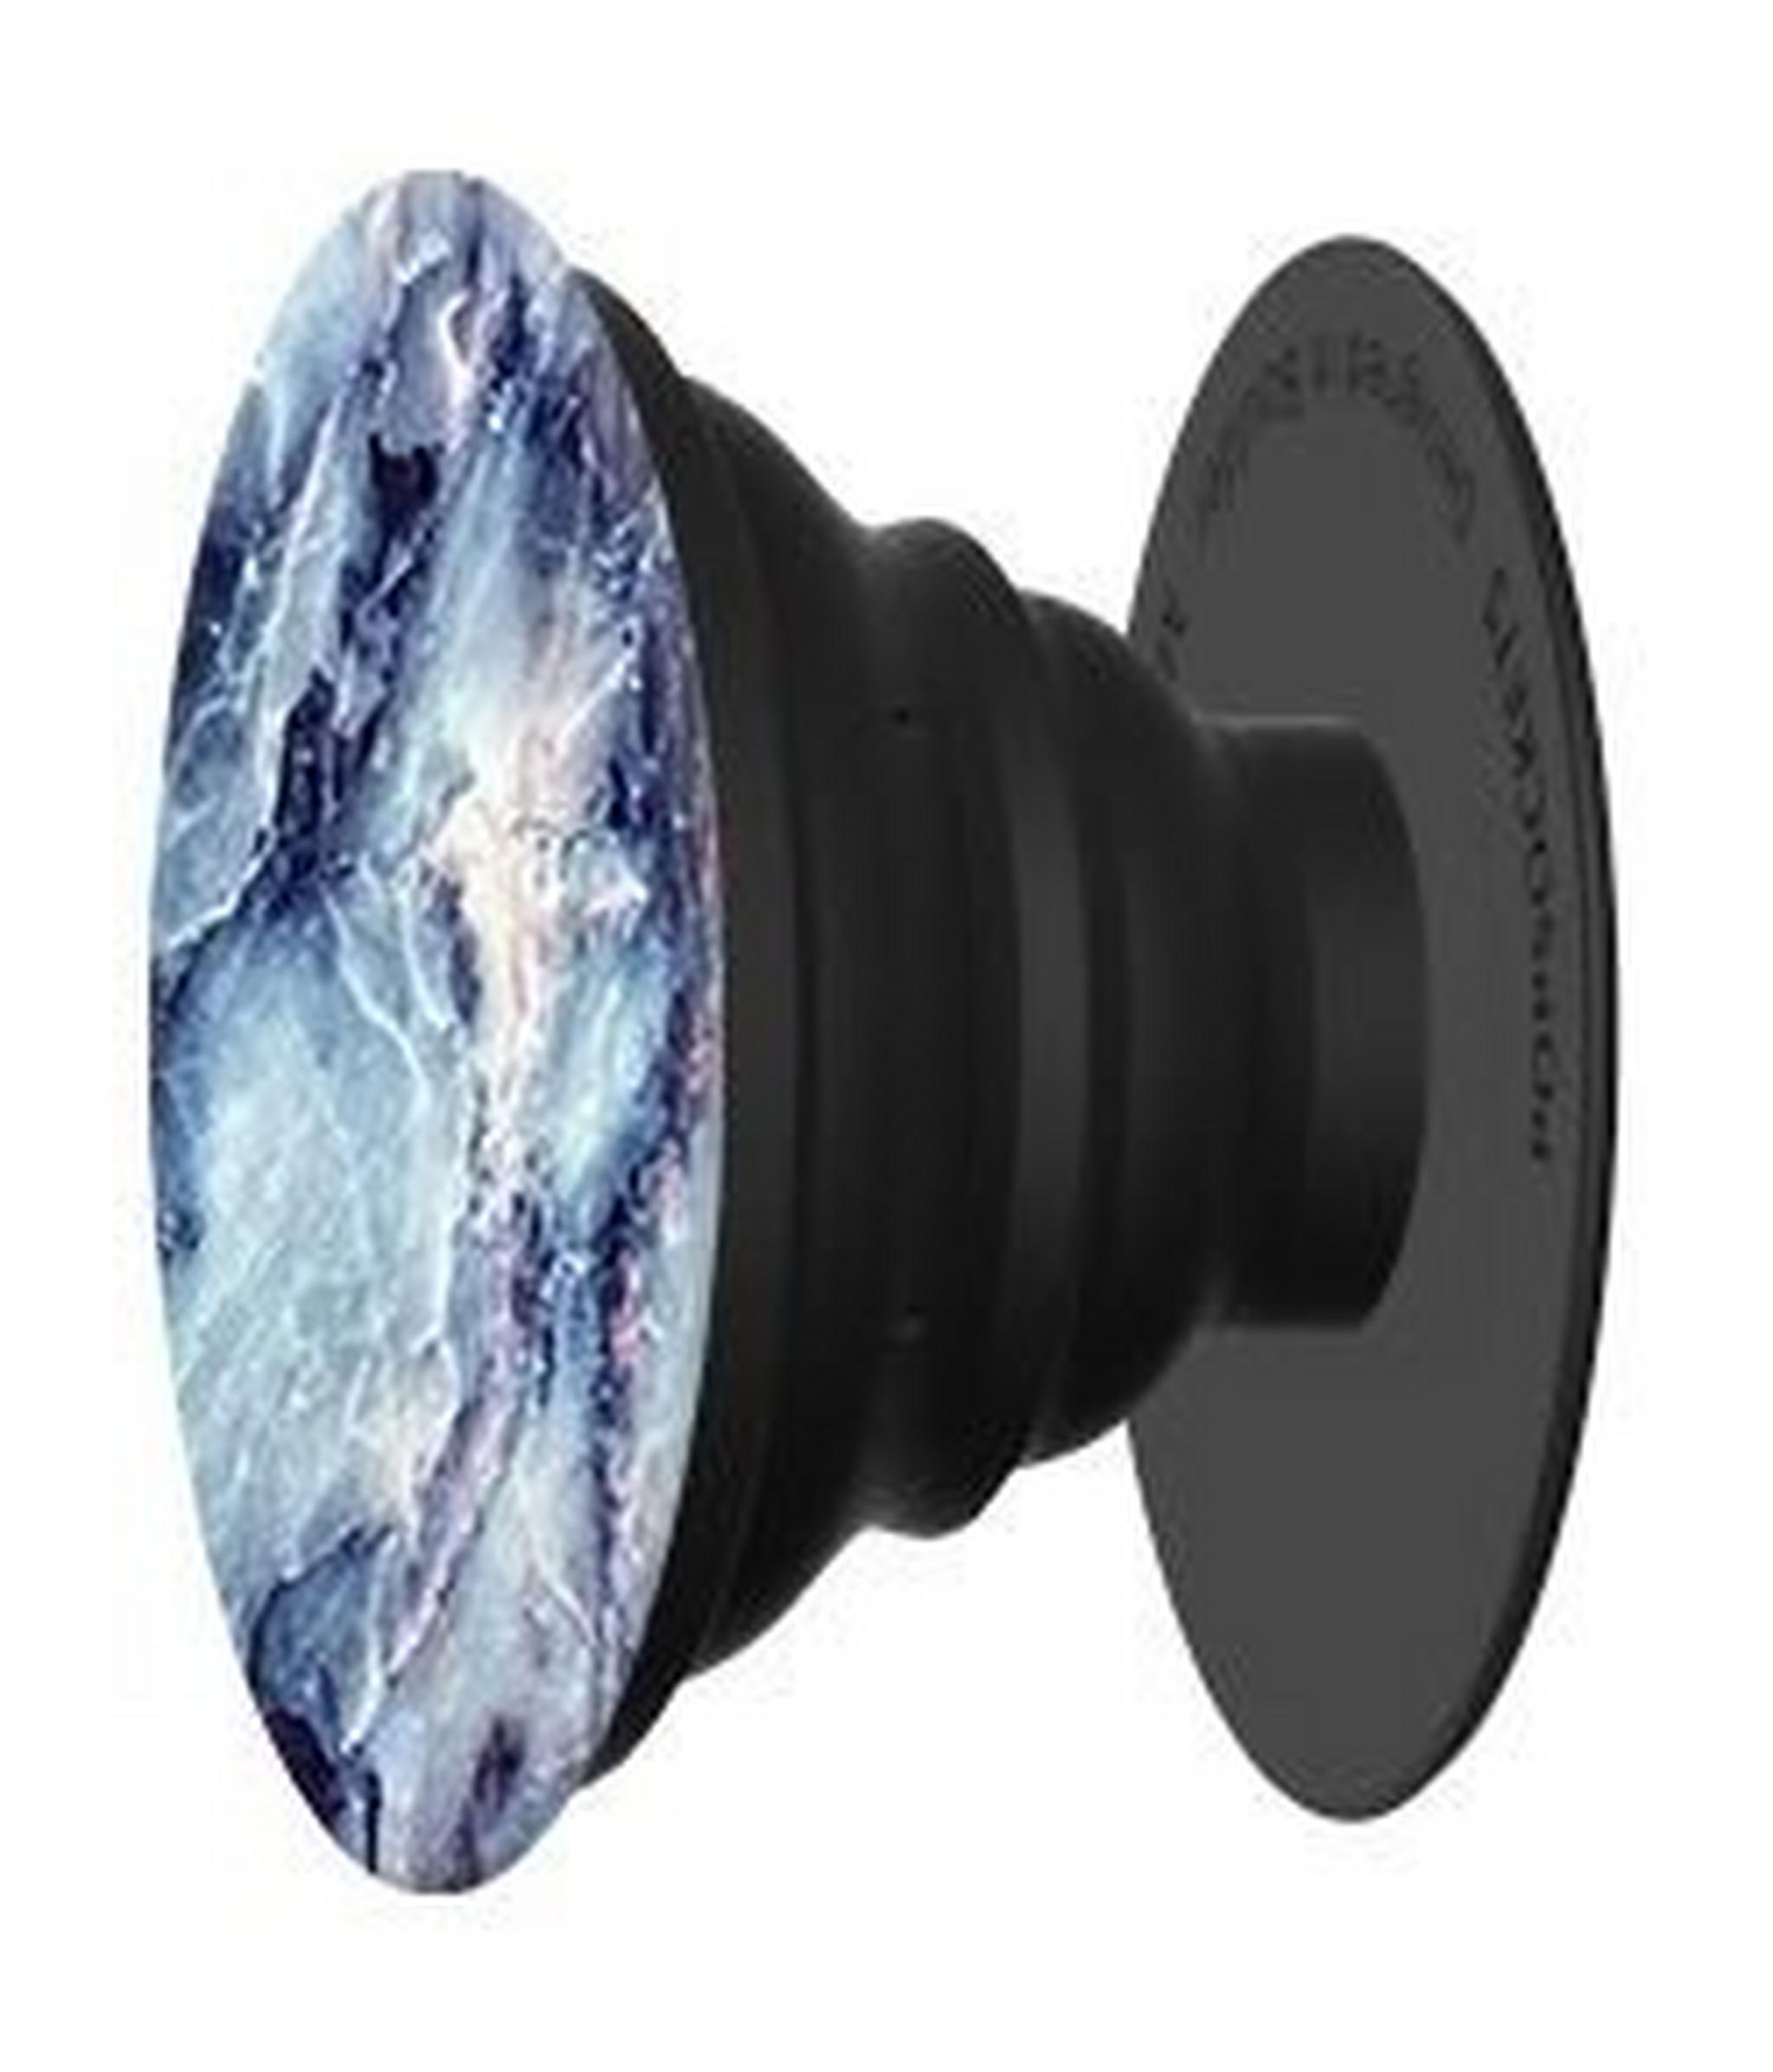 Popsockets Phone Stand and Grip - Blue Marble